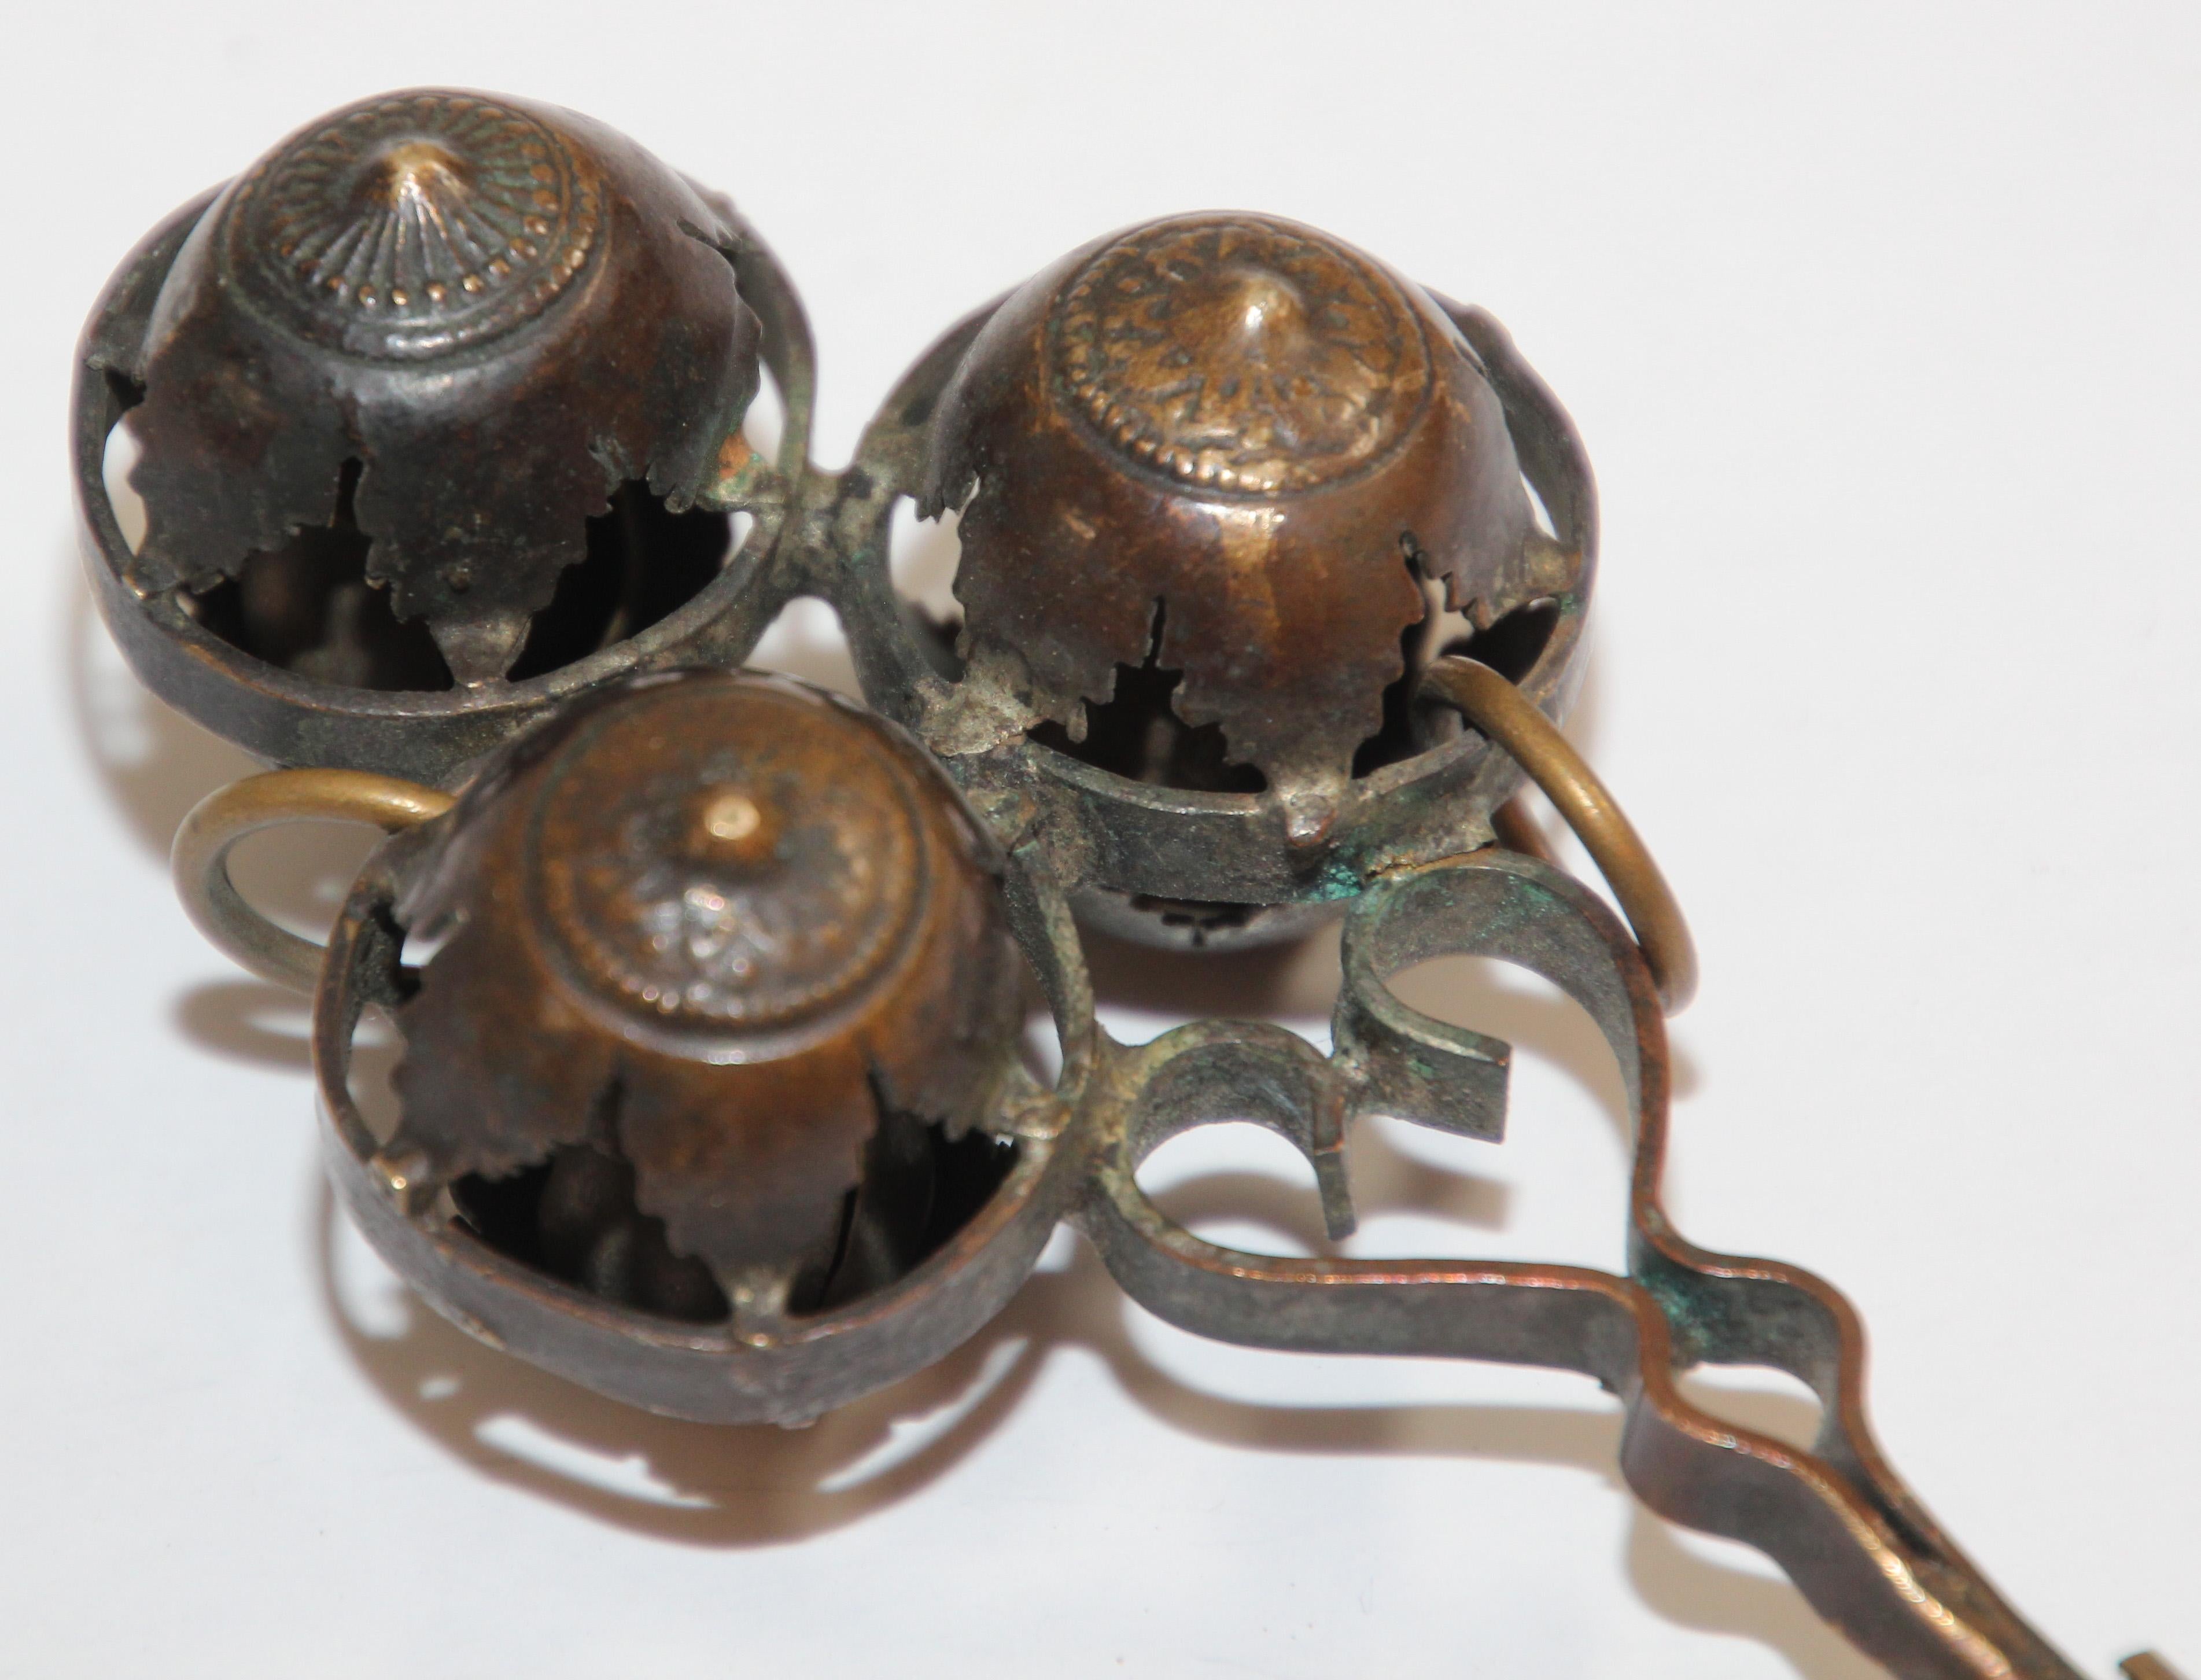 Antique brass baby rattle whistle bell dangles, India.
Handcrafted baby rattle in openwork designs with whistle handle and three decorative bell dangles.
Rare Hindu collector piece.
Dimensions: 4.5